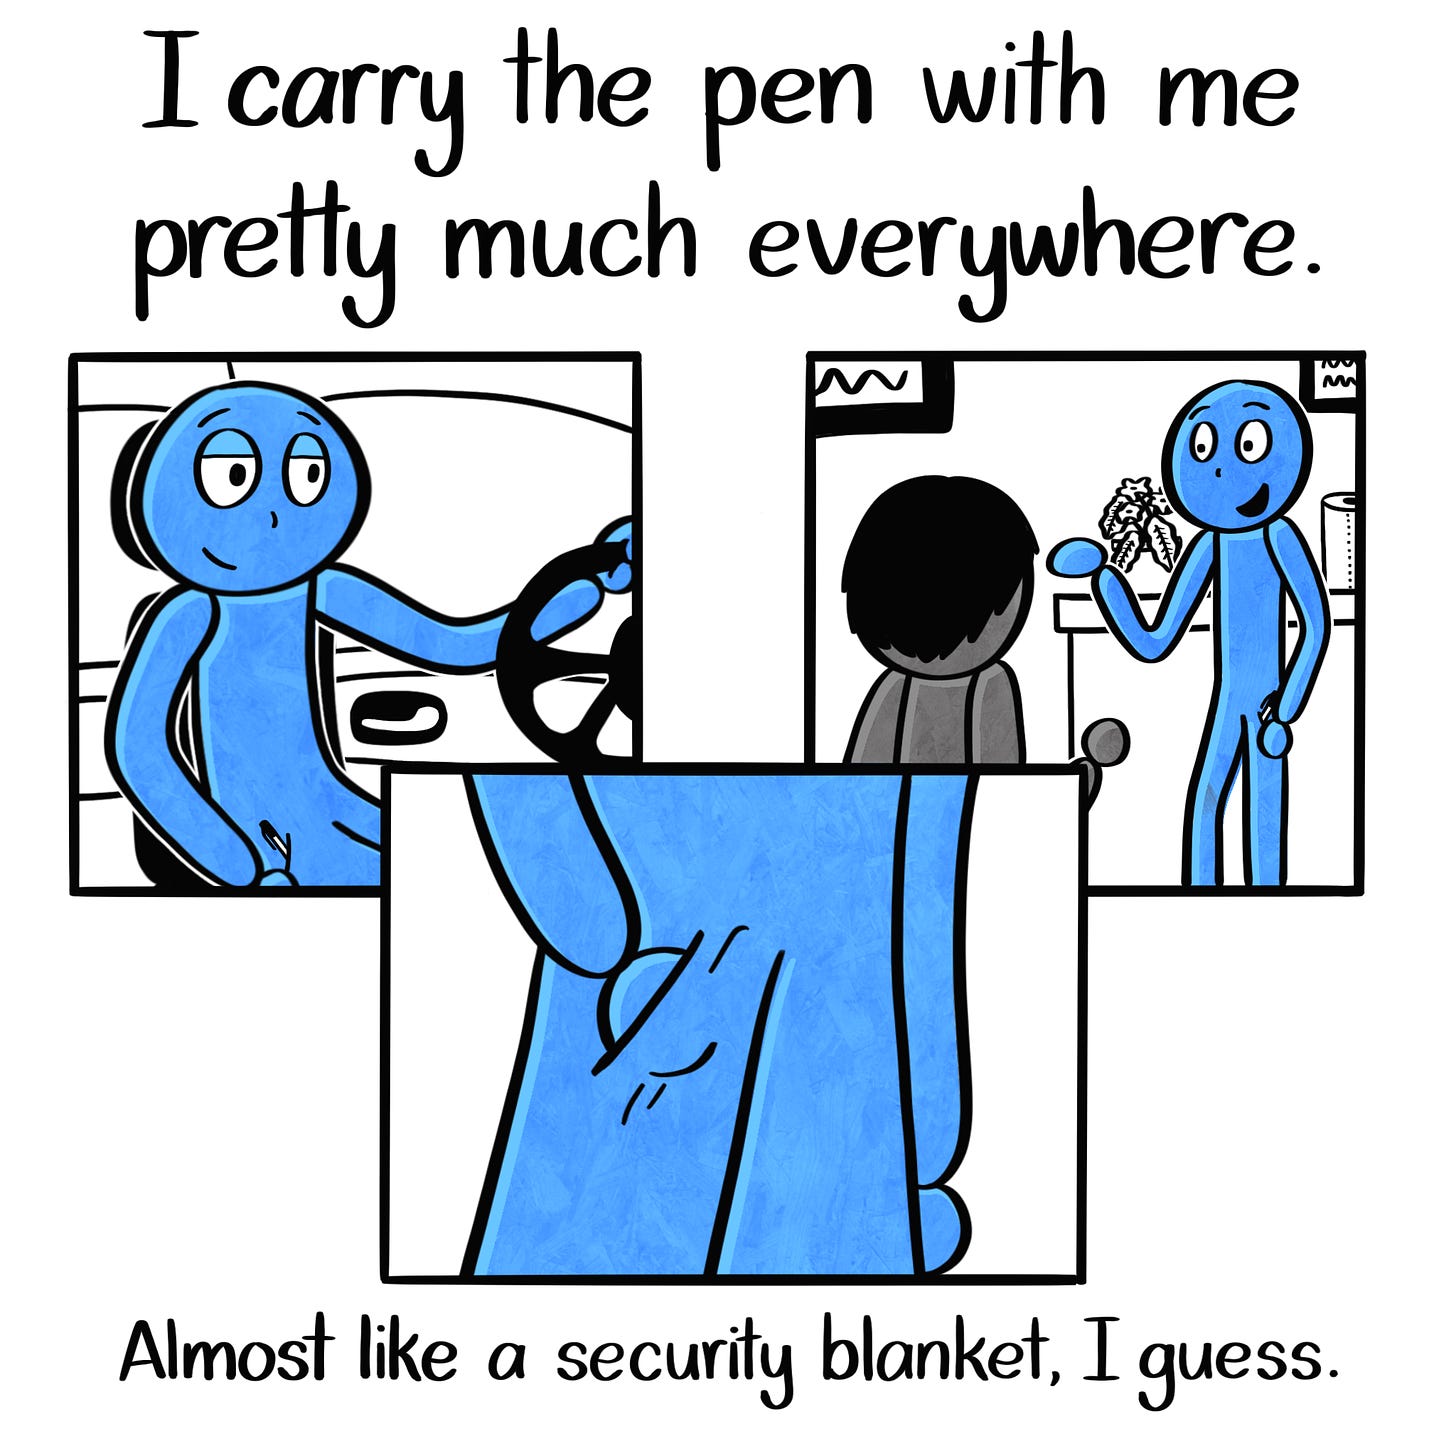 Caption: I carry the pen with me pretty much everywhere. Almost like a security blanket, I guess. Image: Three panels showing things the Blue Person does throughout their day. Driving their car, talking to a coworker, putting their hand in their pocket to feel the pen, which can be seen in each panel.